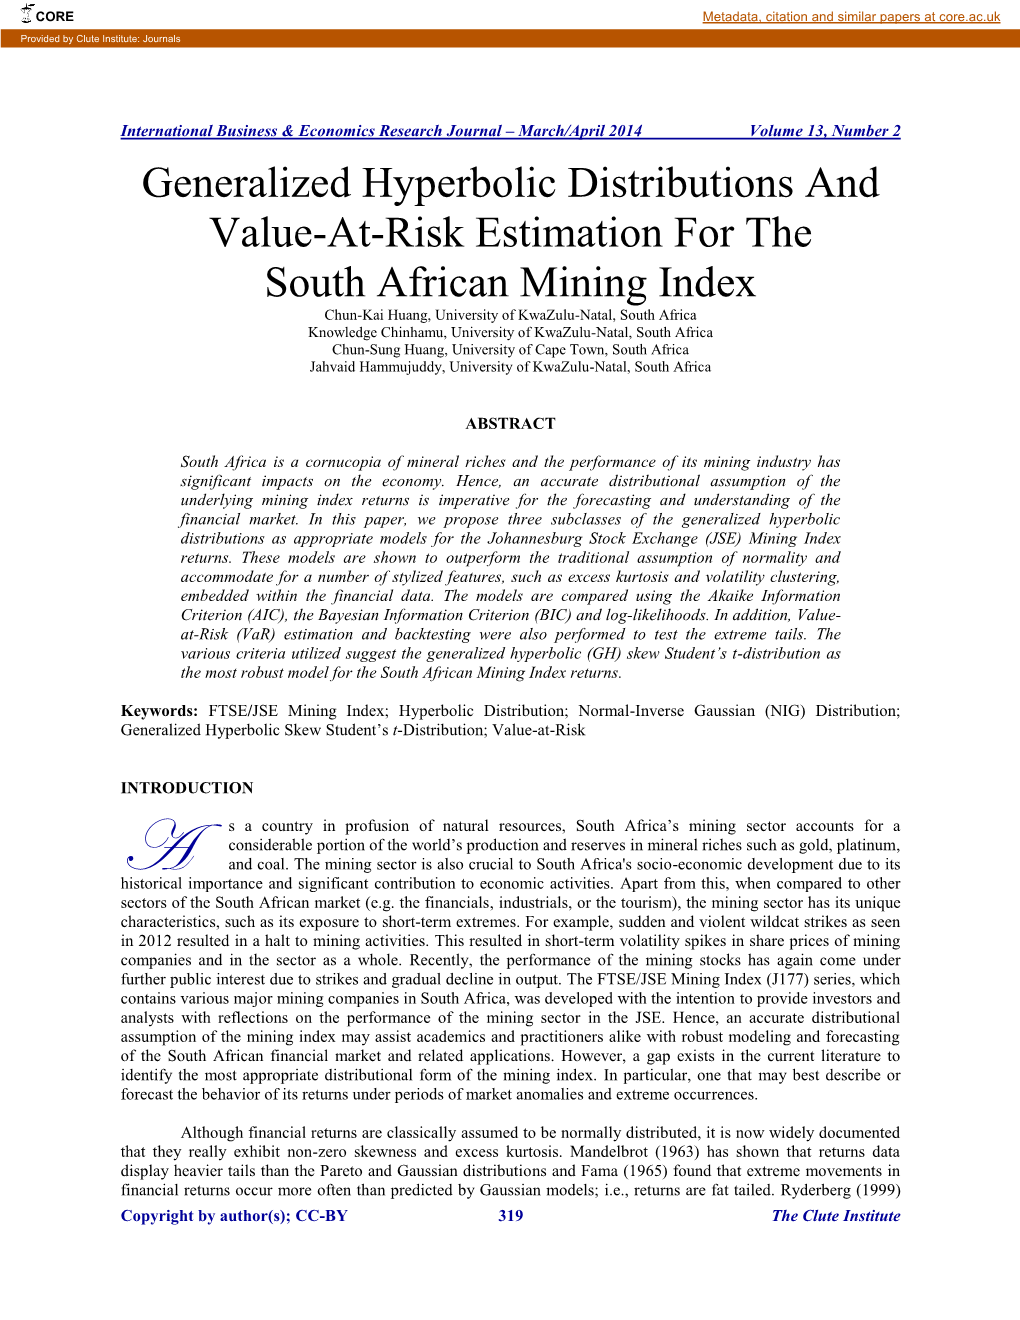 Generalized Hyperbolic Distributions and Value-At-Risk Estimation For